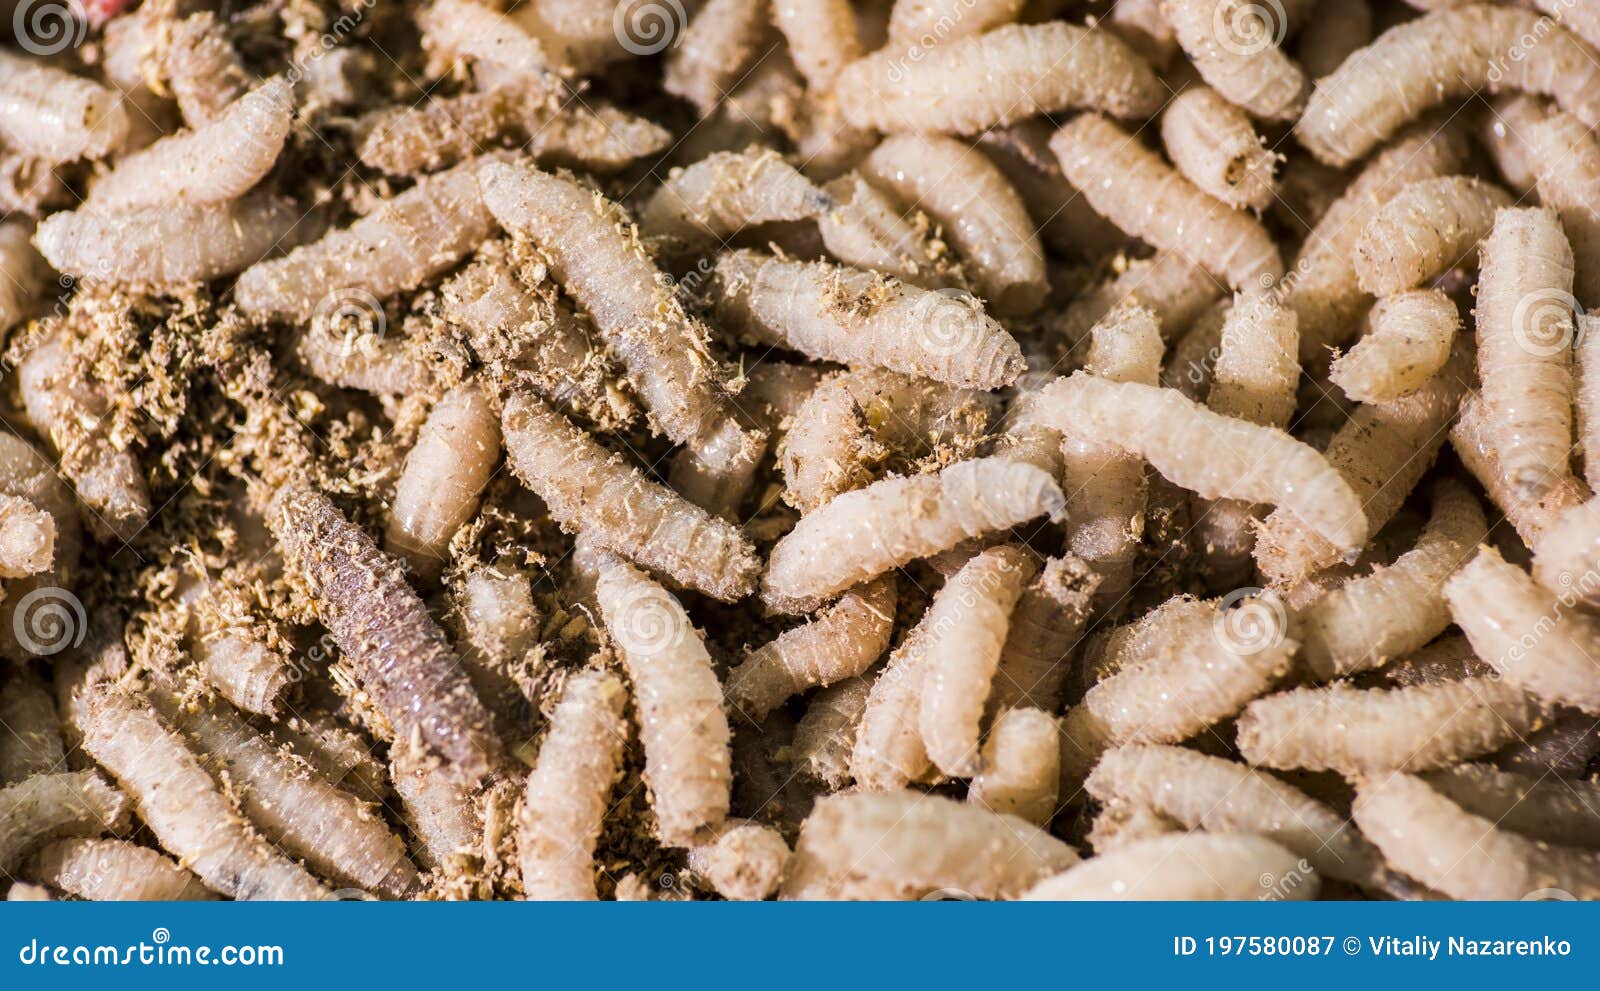 Lots of Maggots, Bait for Winter Fishing Stock Image - Image of